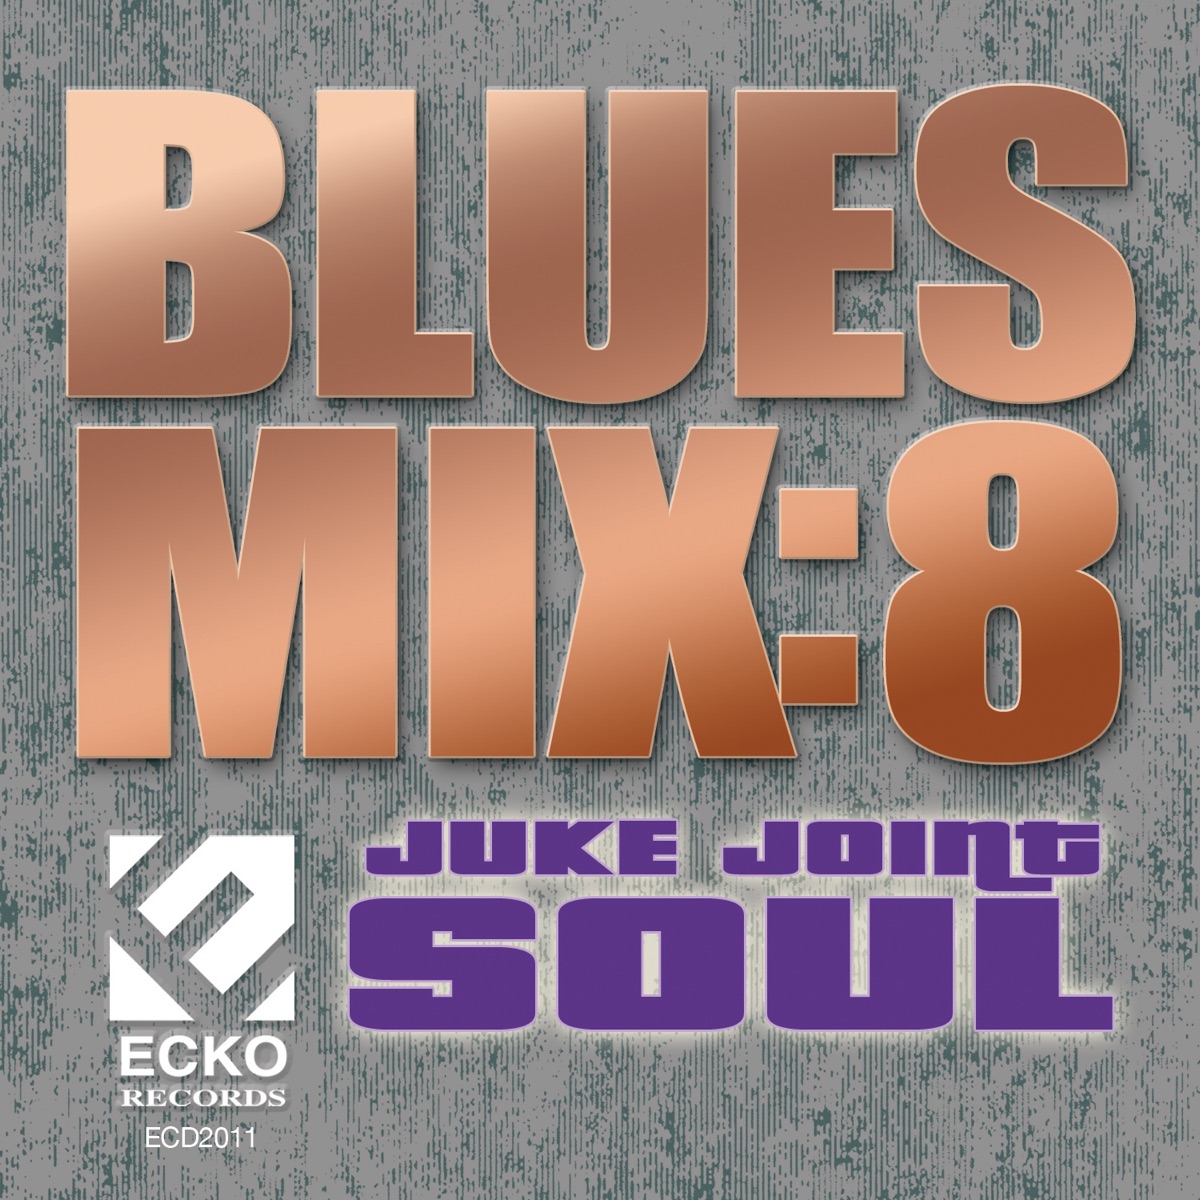 Blues Mix vol. 2: Old School Blues by Various Artists on Apple Music